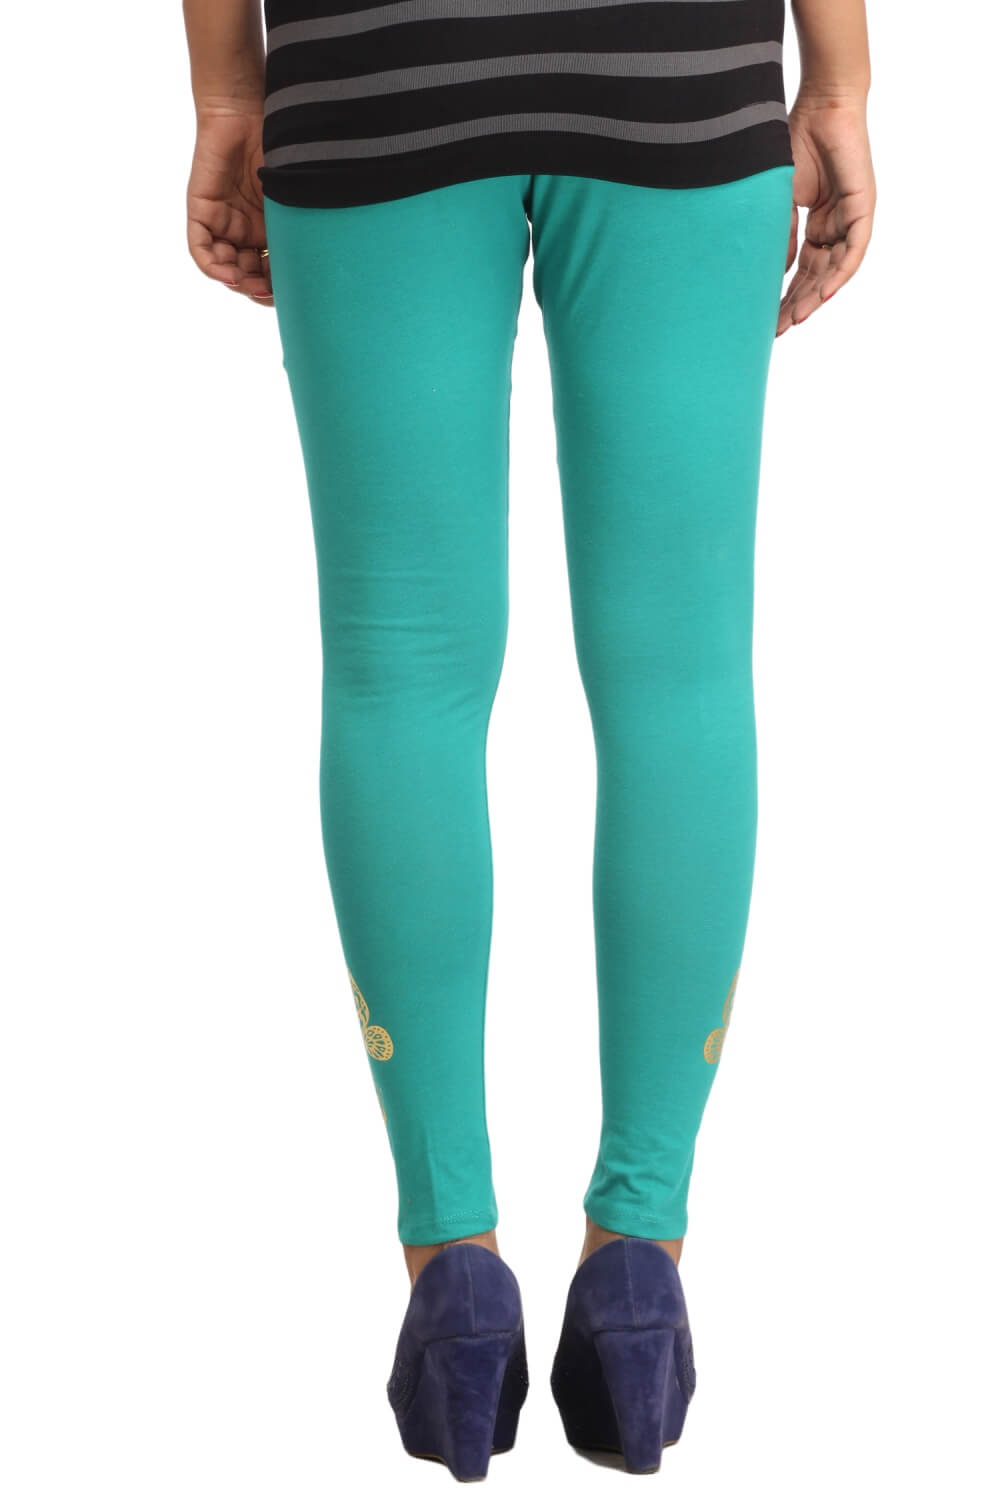 Light Green Gold Placement Print Cotton Legging – Zubix : Clothing,  Accessories and Home Furnishing Shop Online